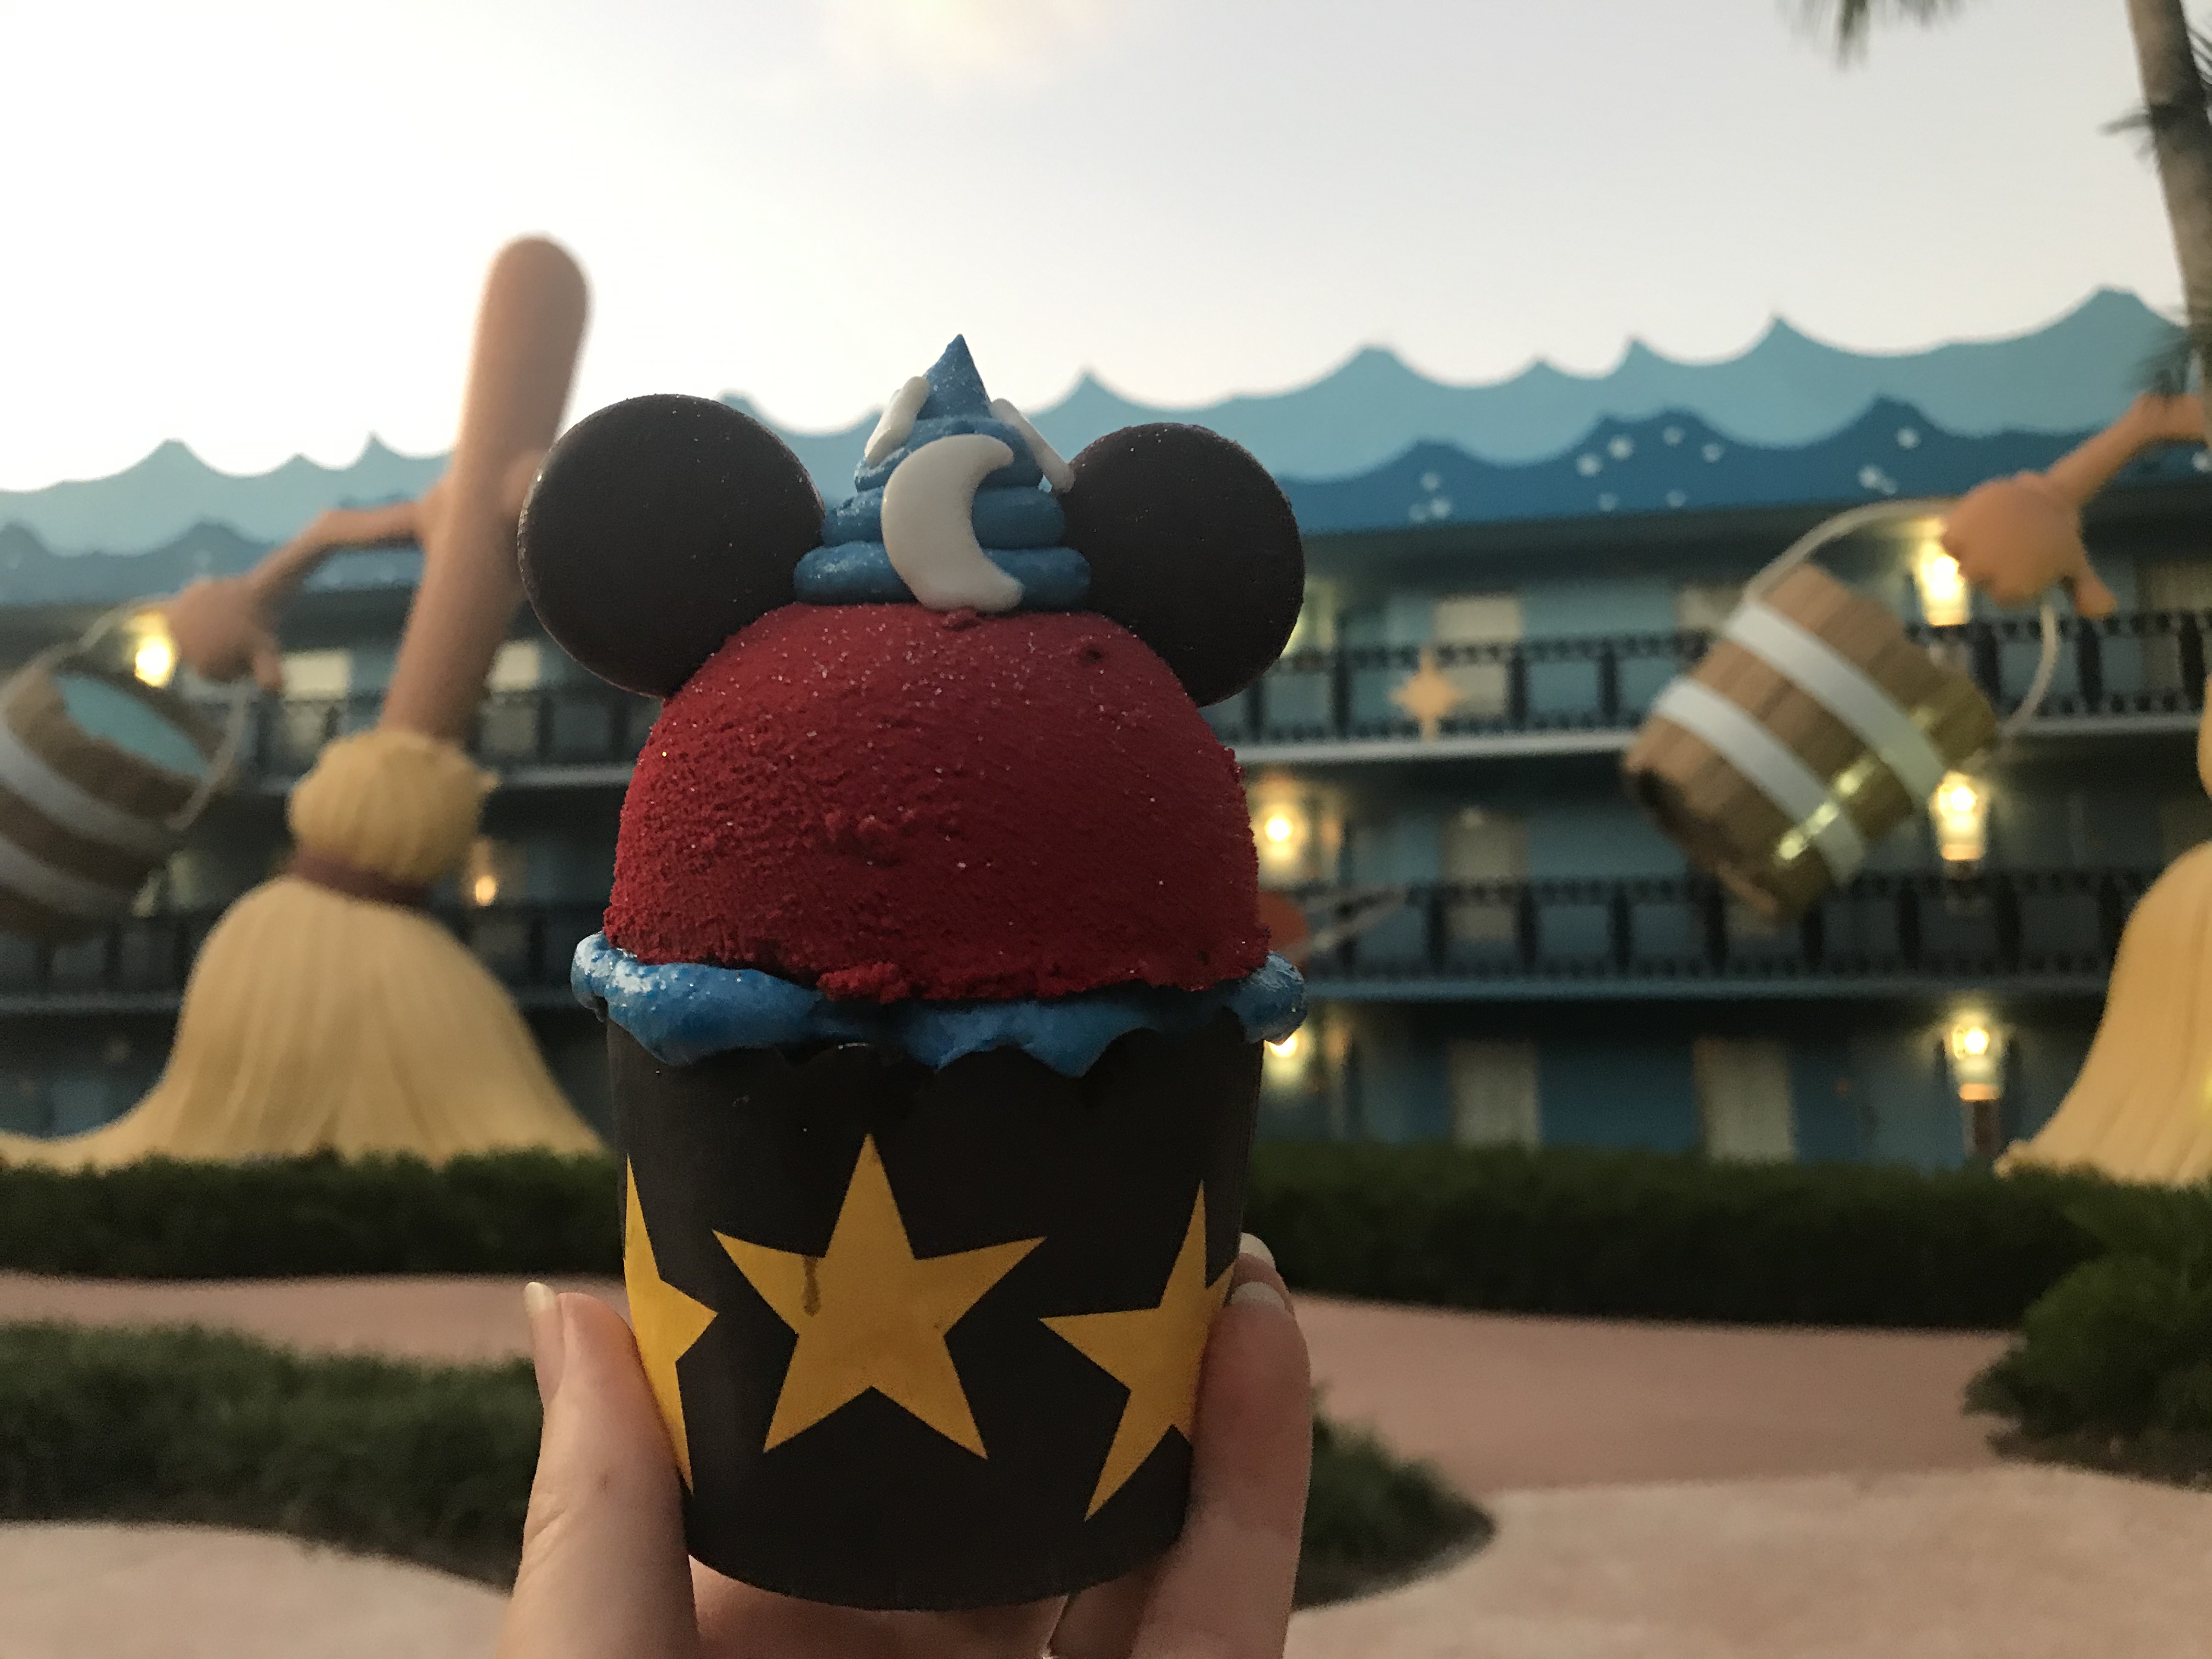 Sorcerer Mickey Cupcake at Disney’s All-Star Movies Is Like Magic